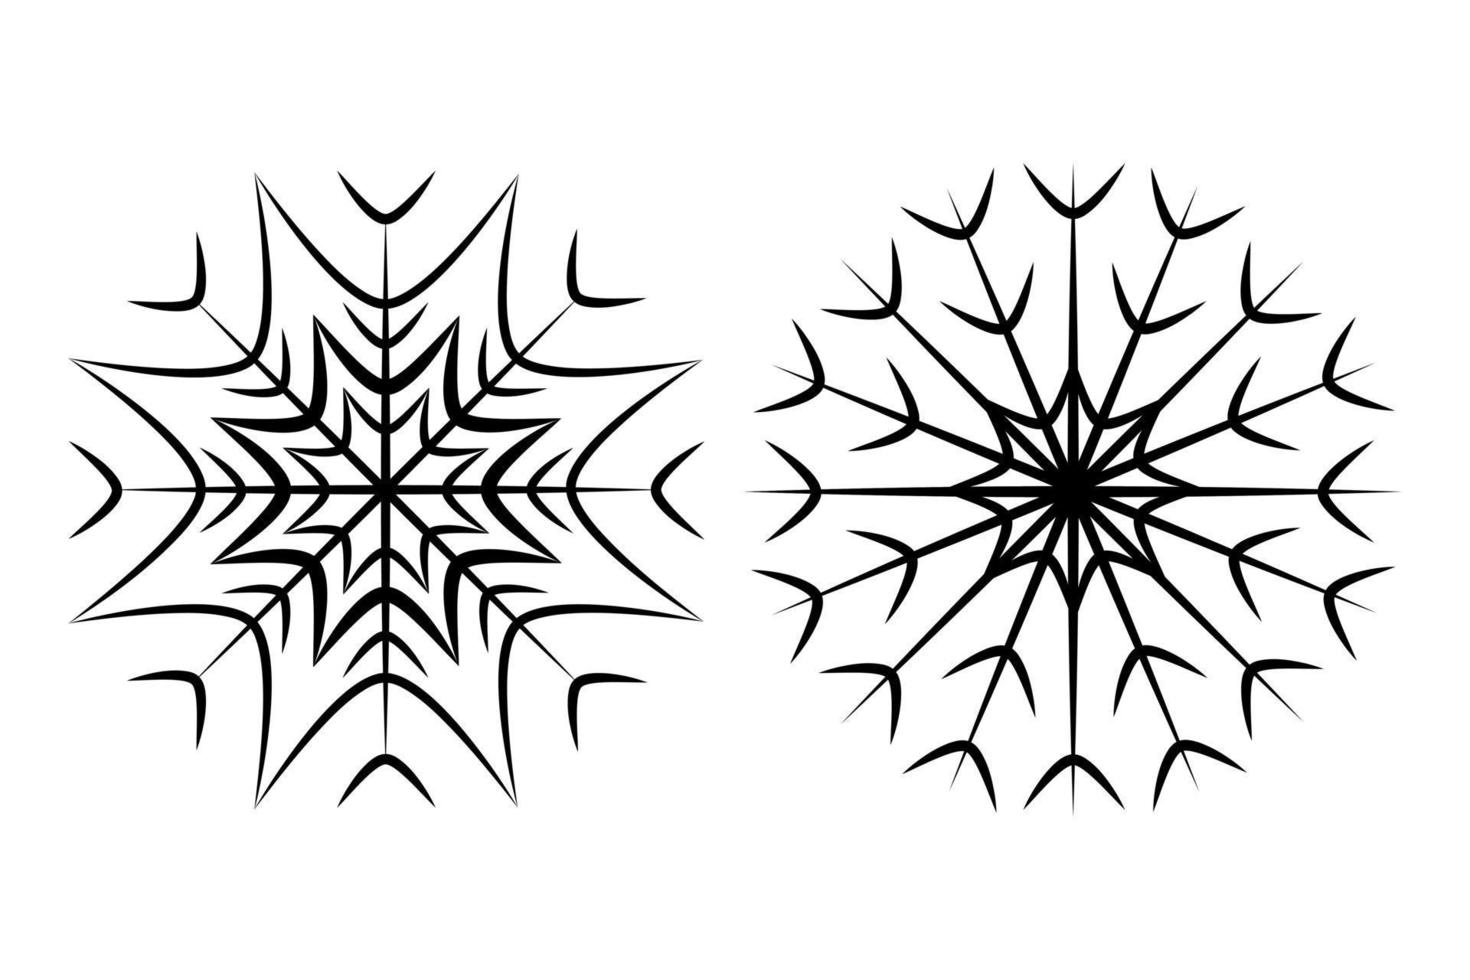 Set of two images from contour drawing of a carved snowflake in minimalist style. Line art. Isolate vector